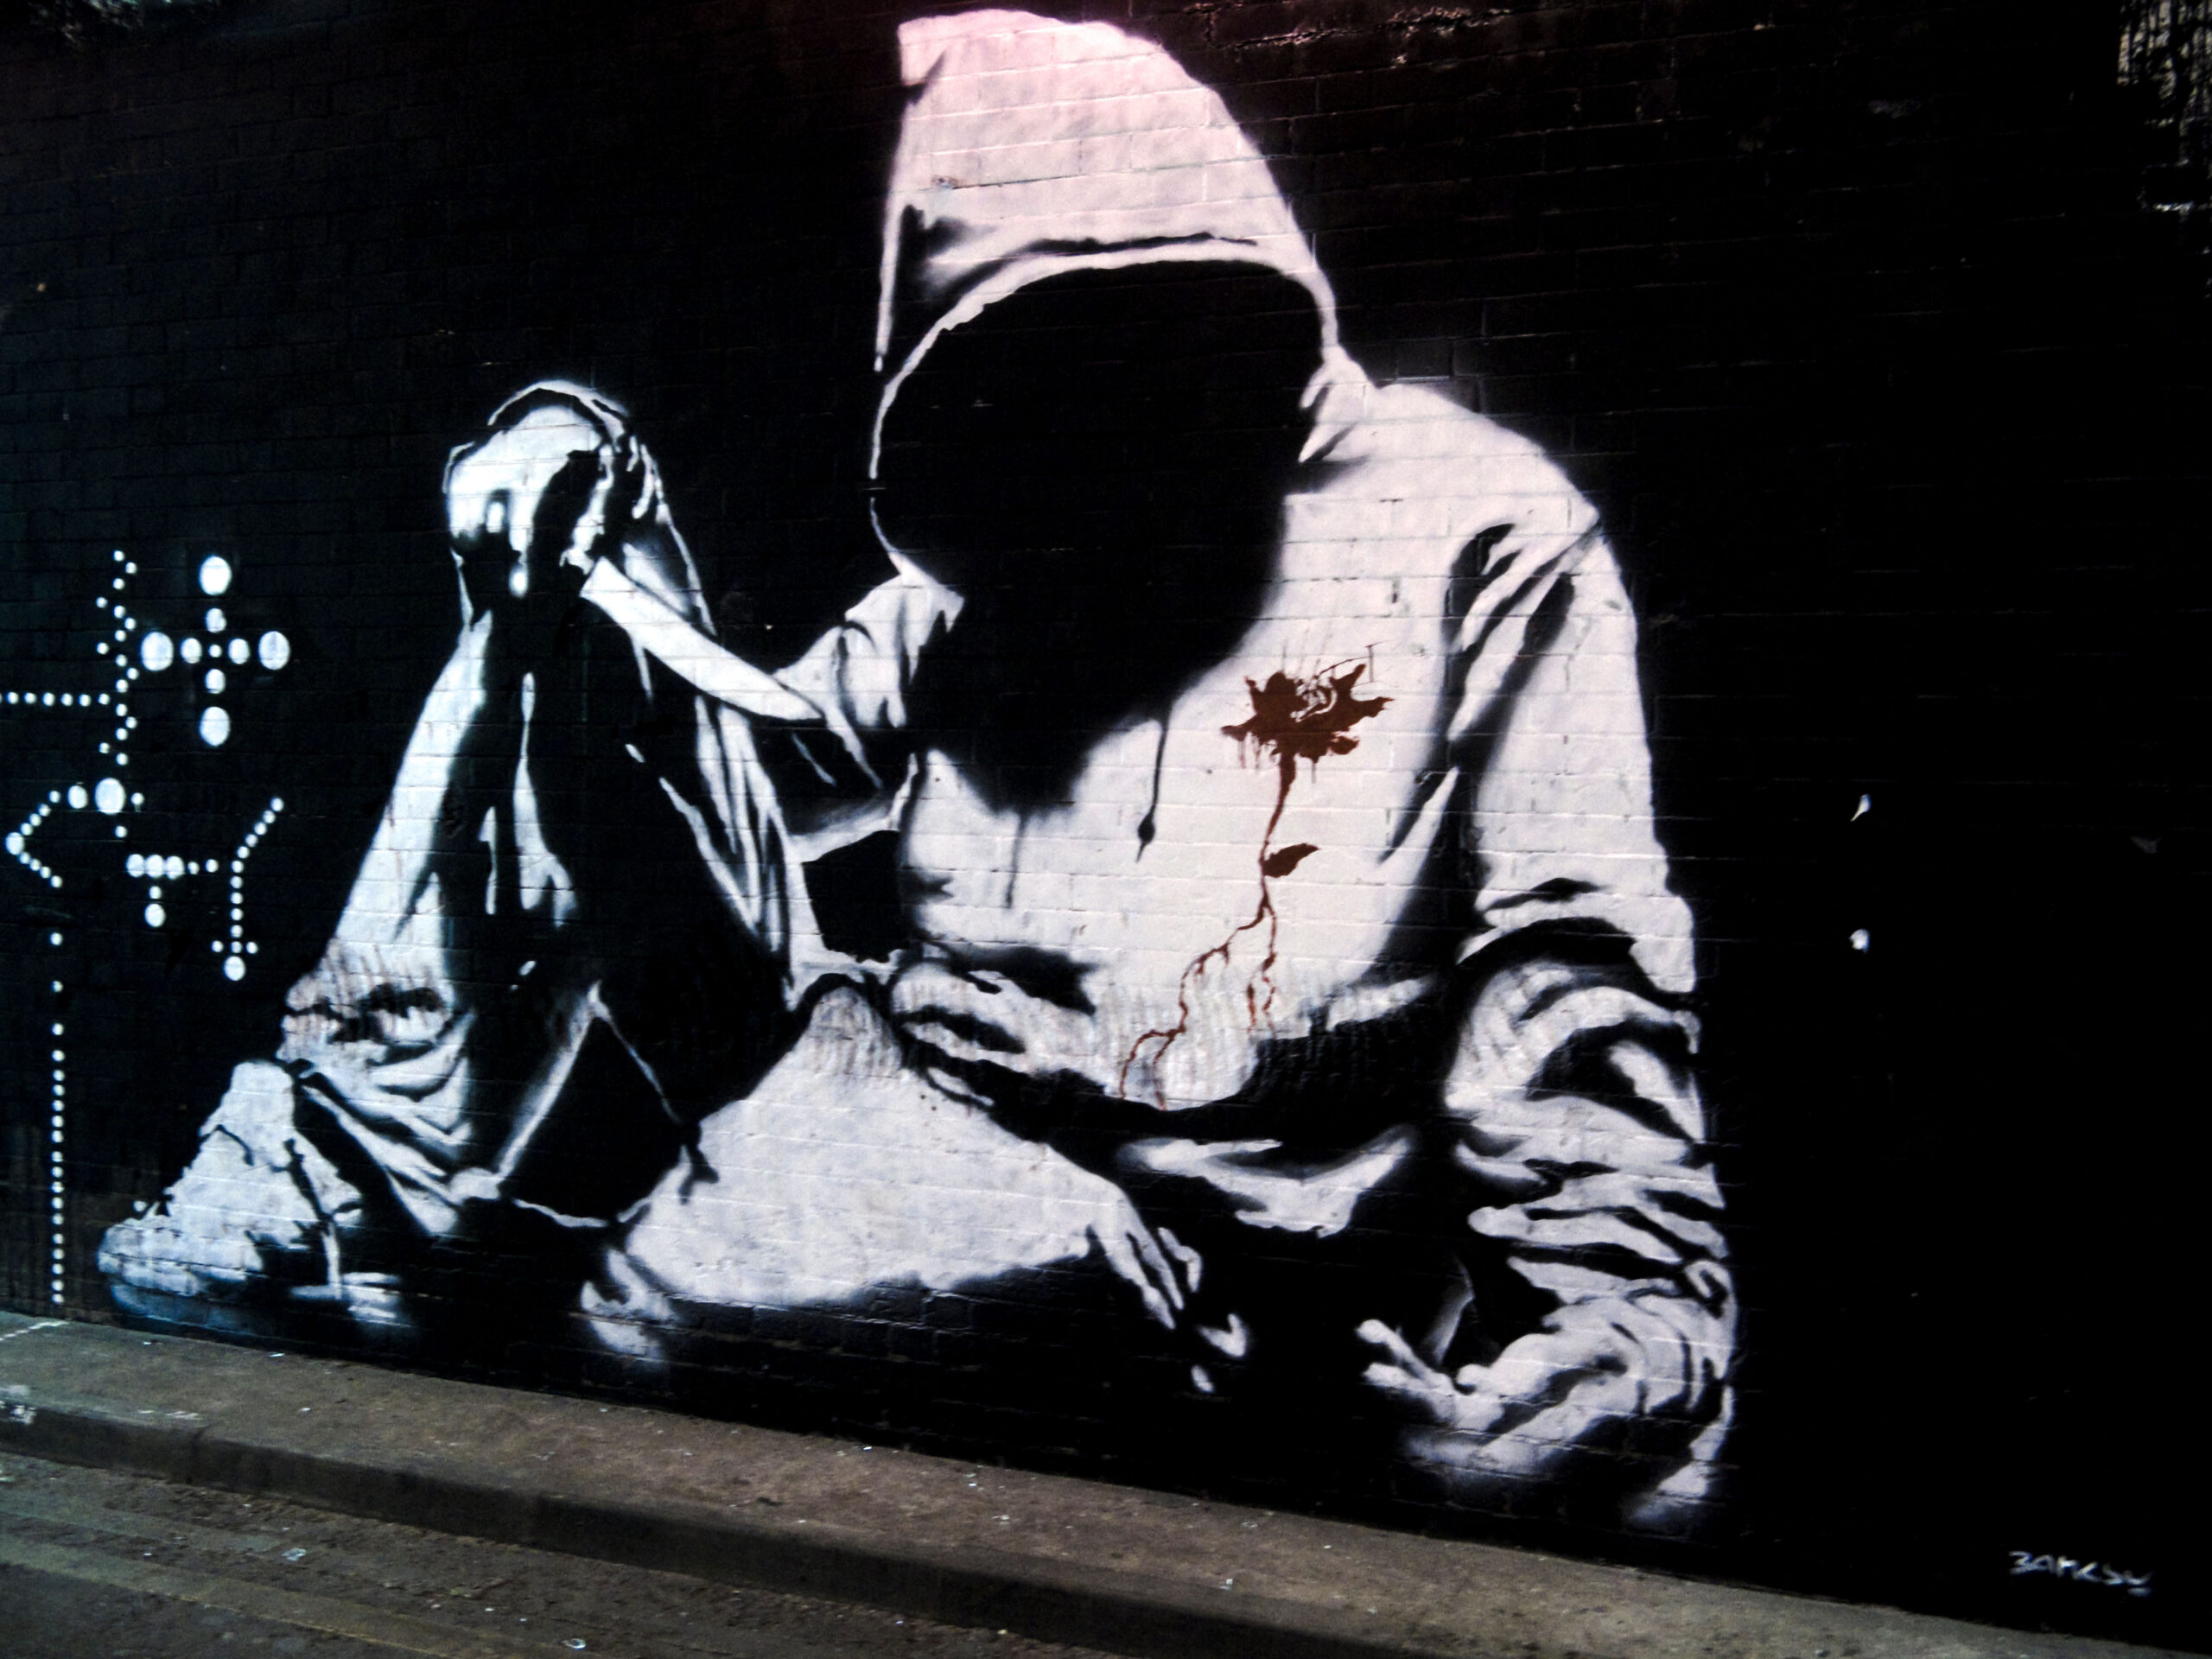 'Hoodie With Knife' was painted on a wall in London's Waterloo